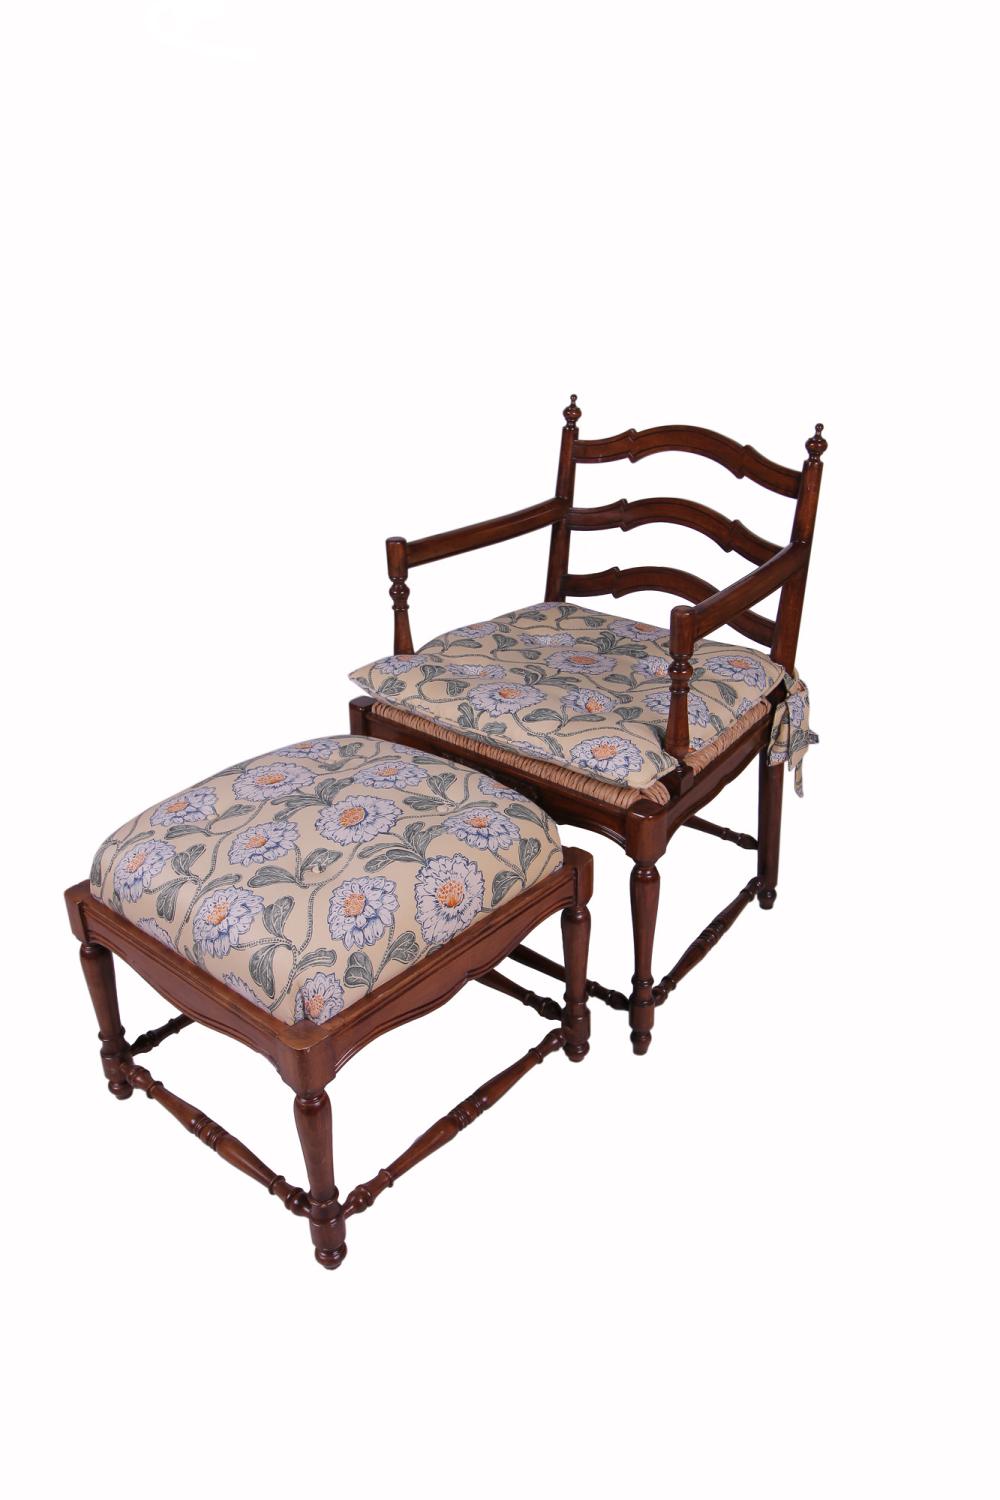 COUNTRY FRENCH STYLE FAUTEUIL  336447